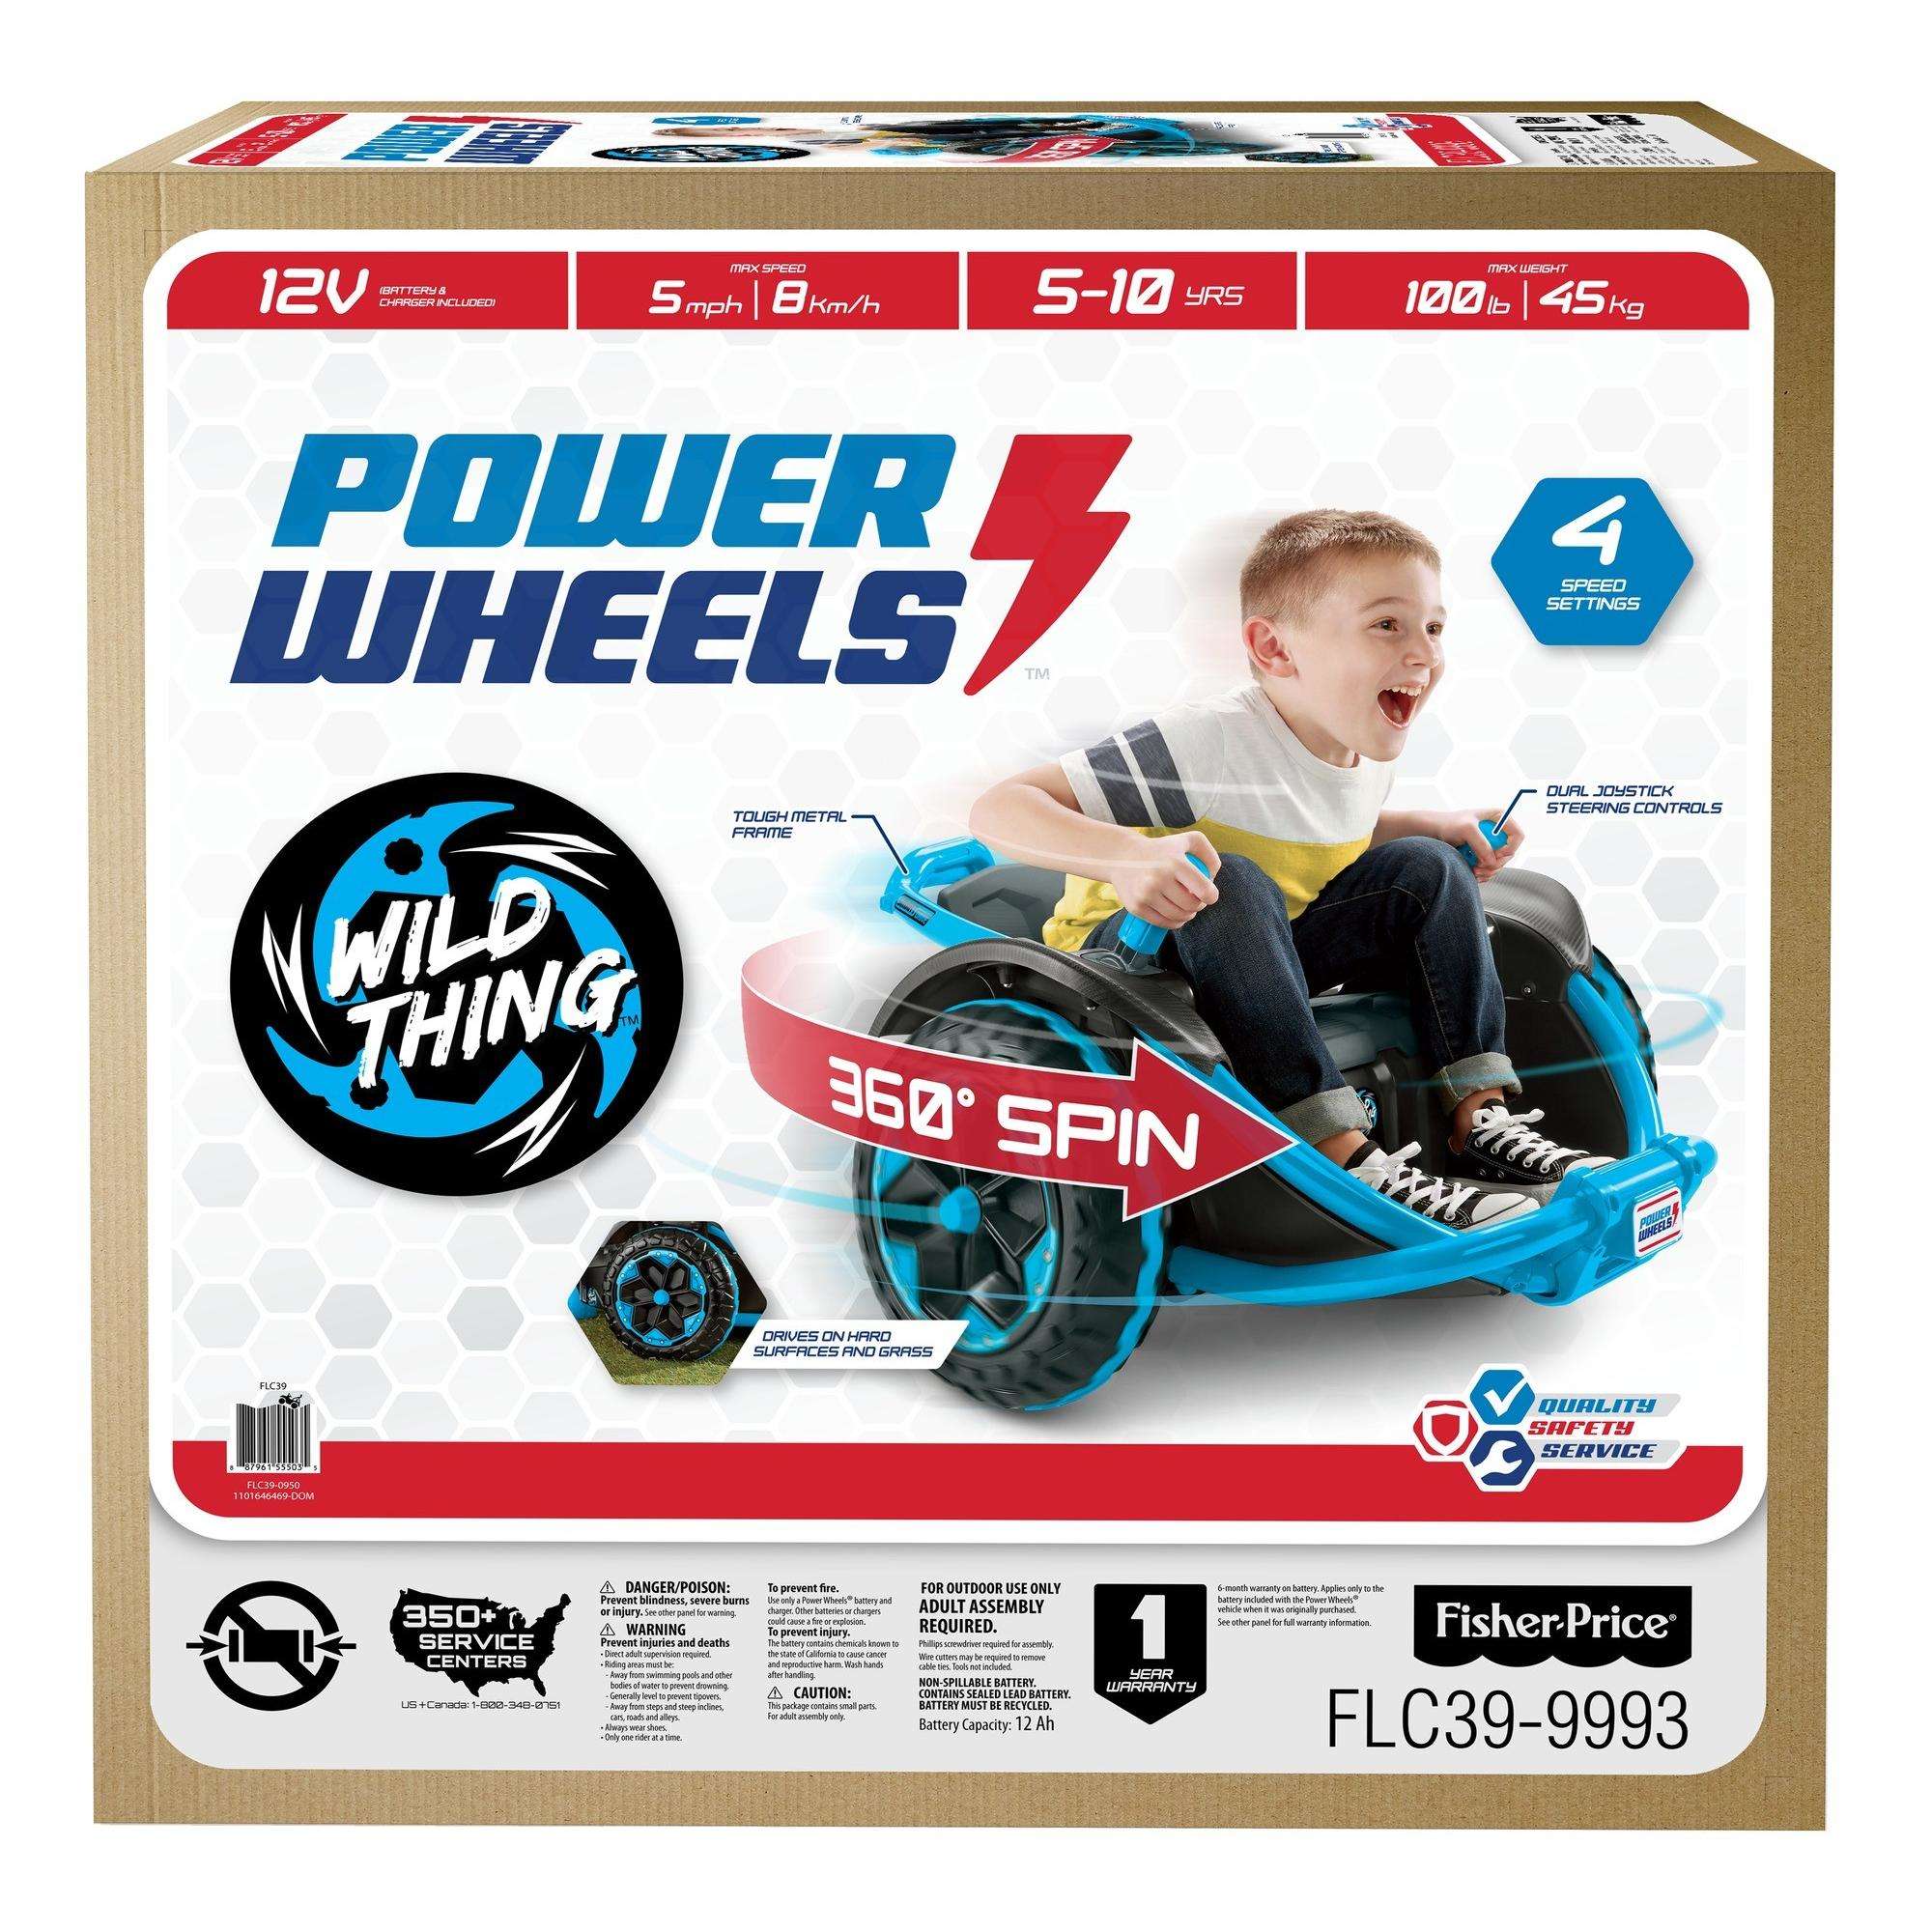 Power Wheels Wild Thing 360 Spinning Ride-On Vehicle, Blue, 12V - image 8 of 10